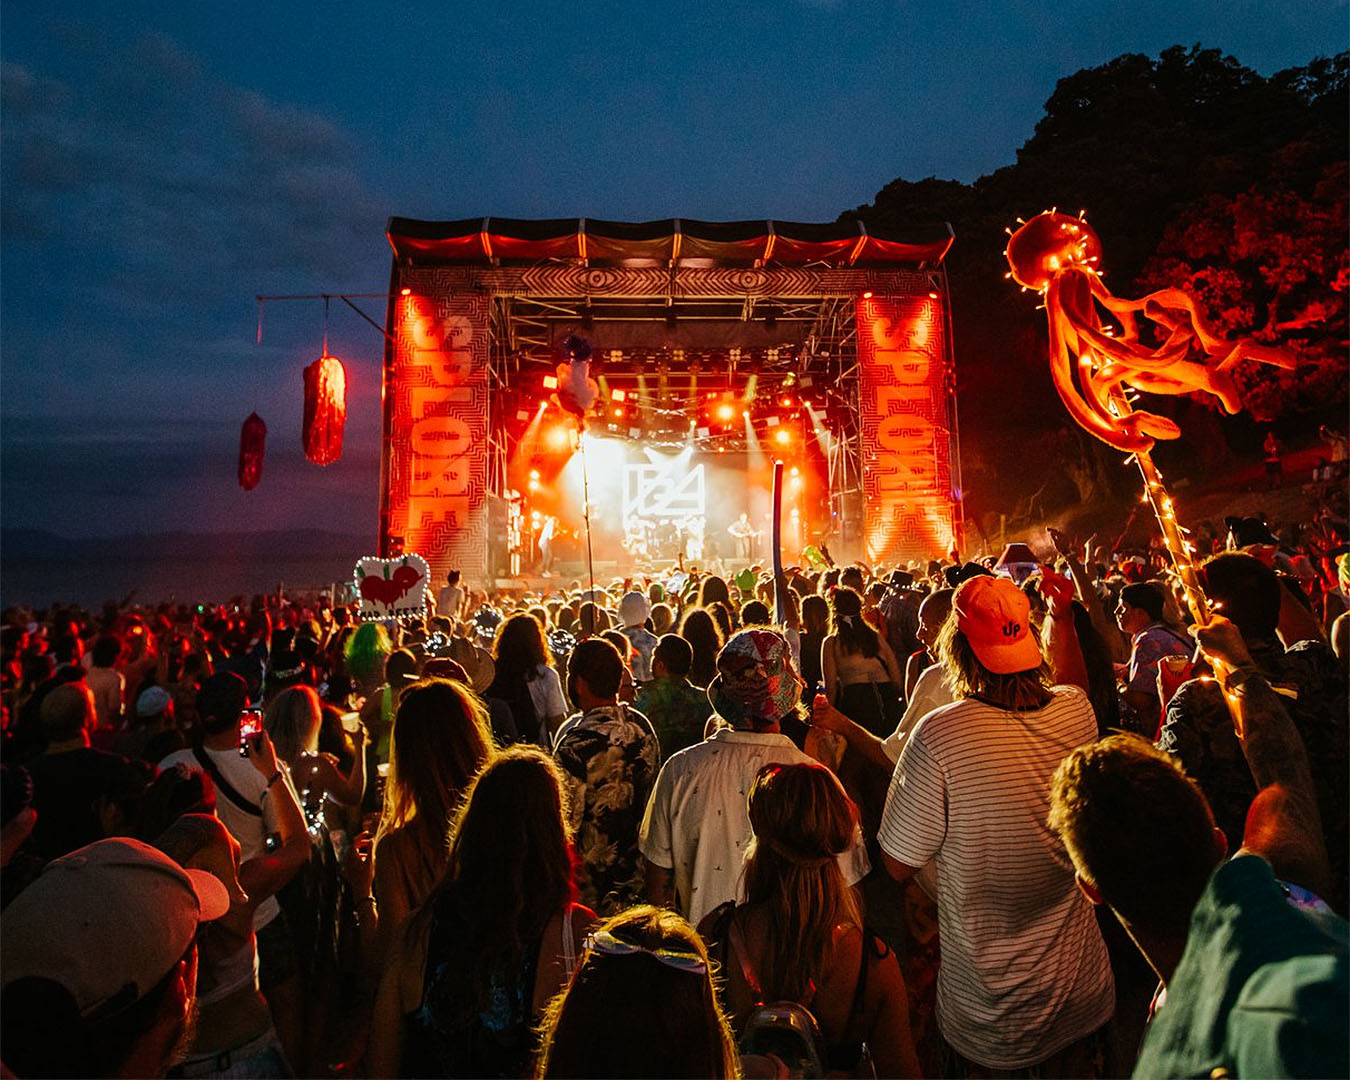 People watch an act on stage amongst multicoloured lights at Splore, one of the best festivals in NZ.